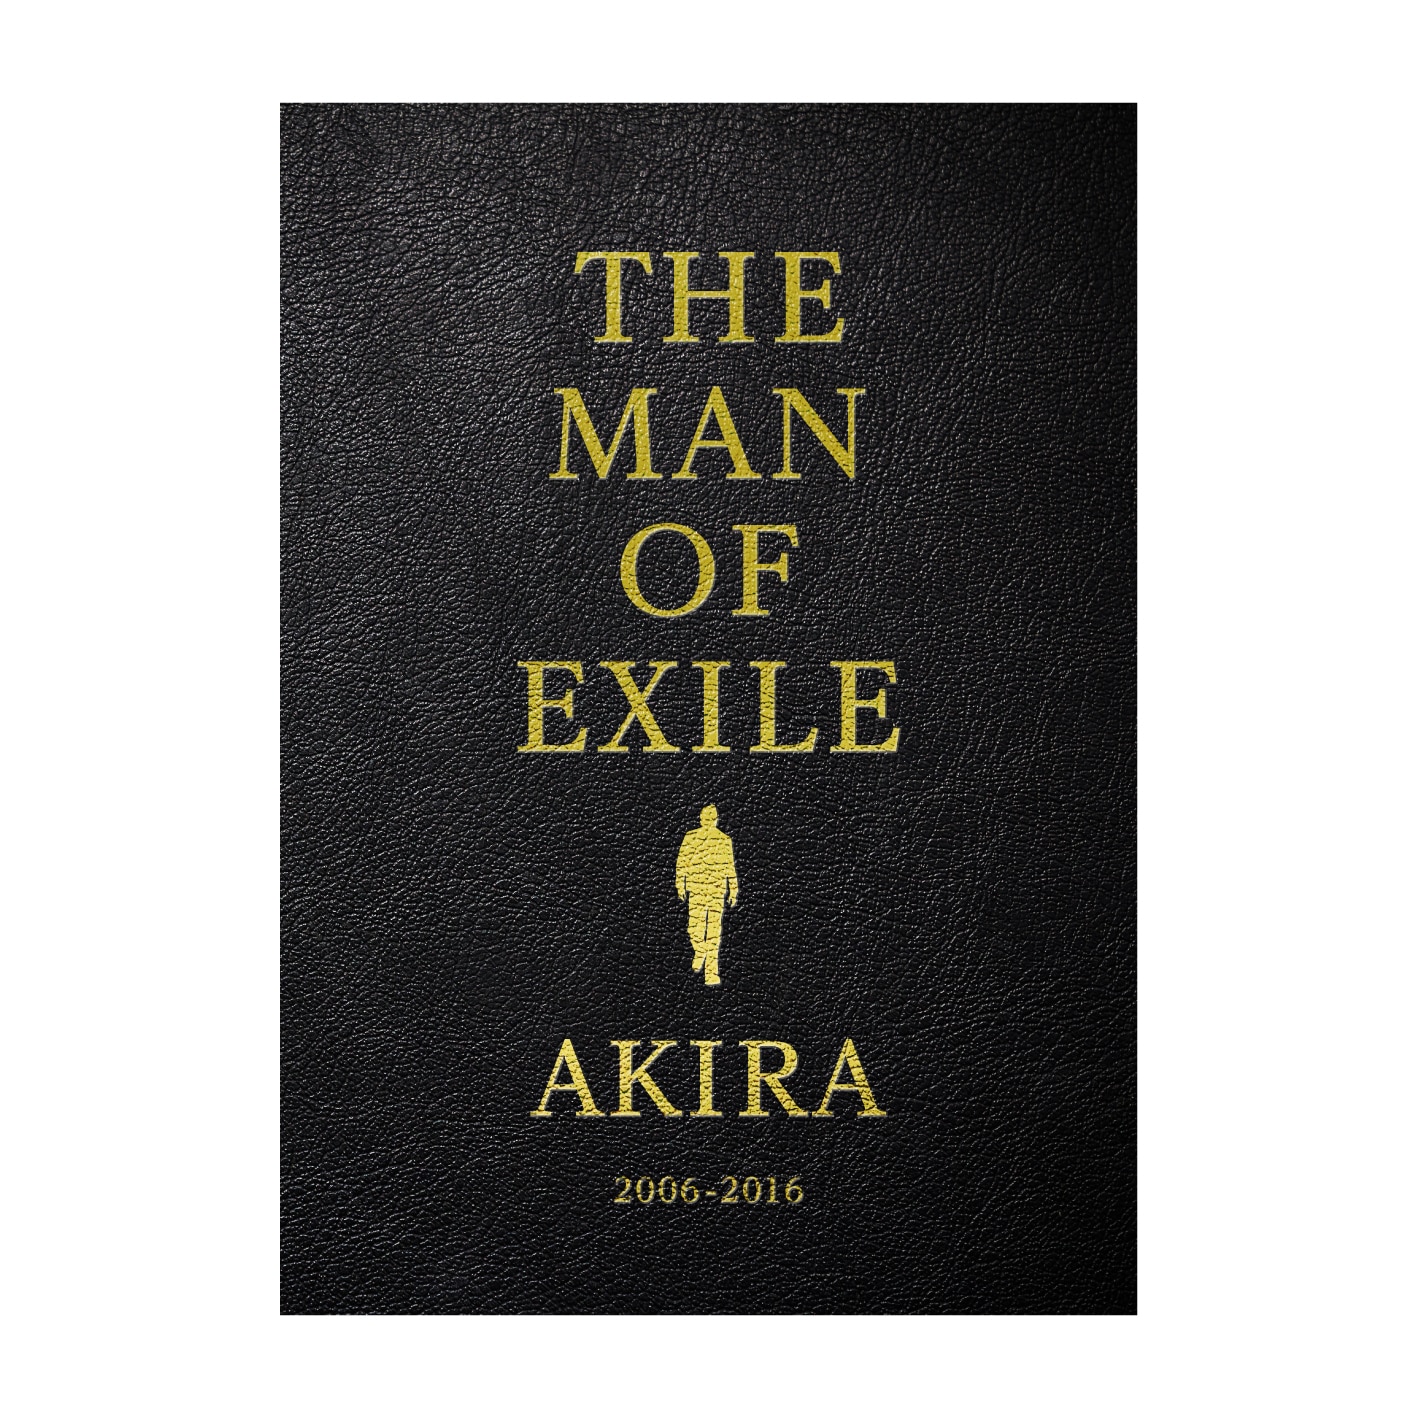 EXILE TRIBE STATION ONLINE STORE｜THE MAN OF EXILE AKIRA 2006-2016 